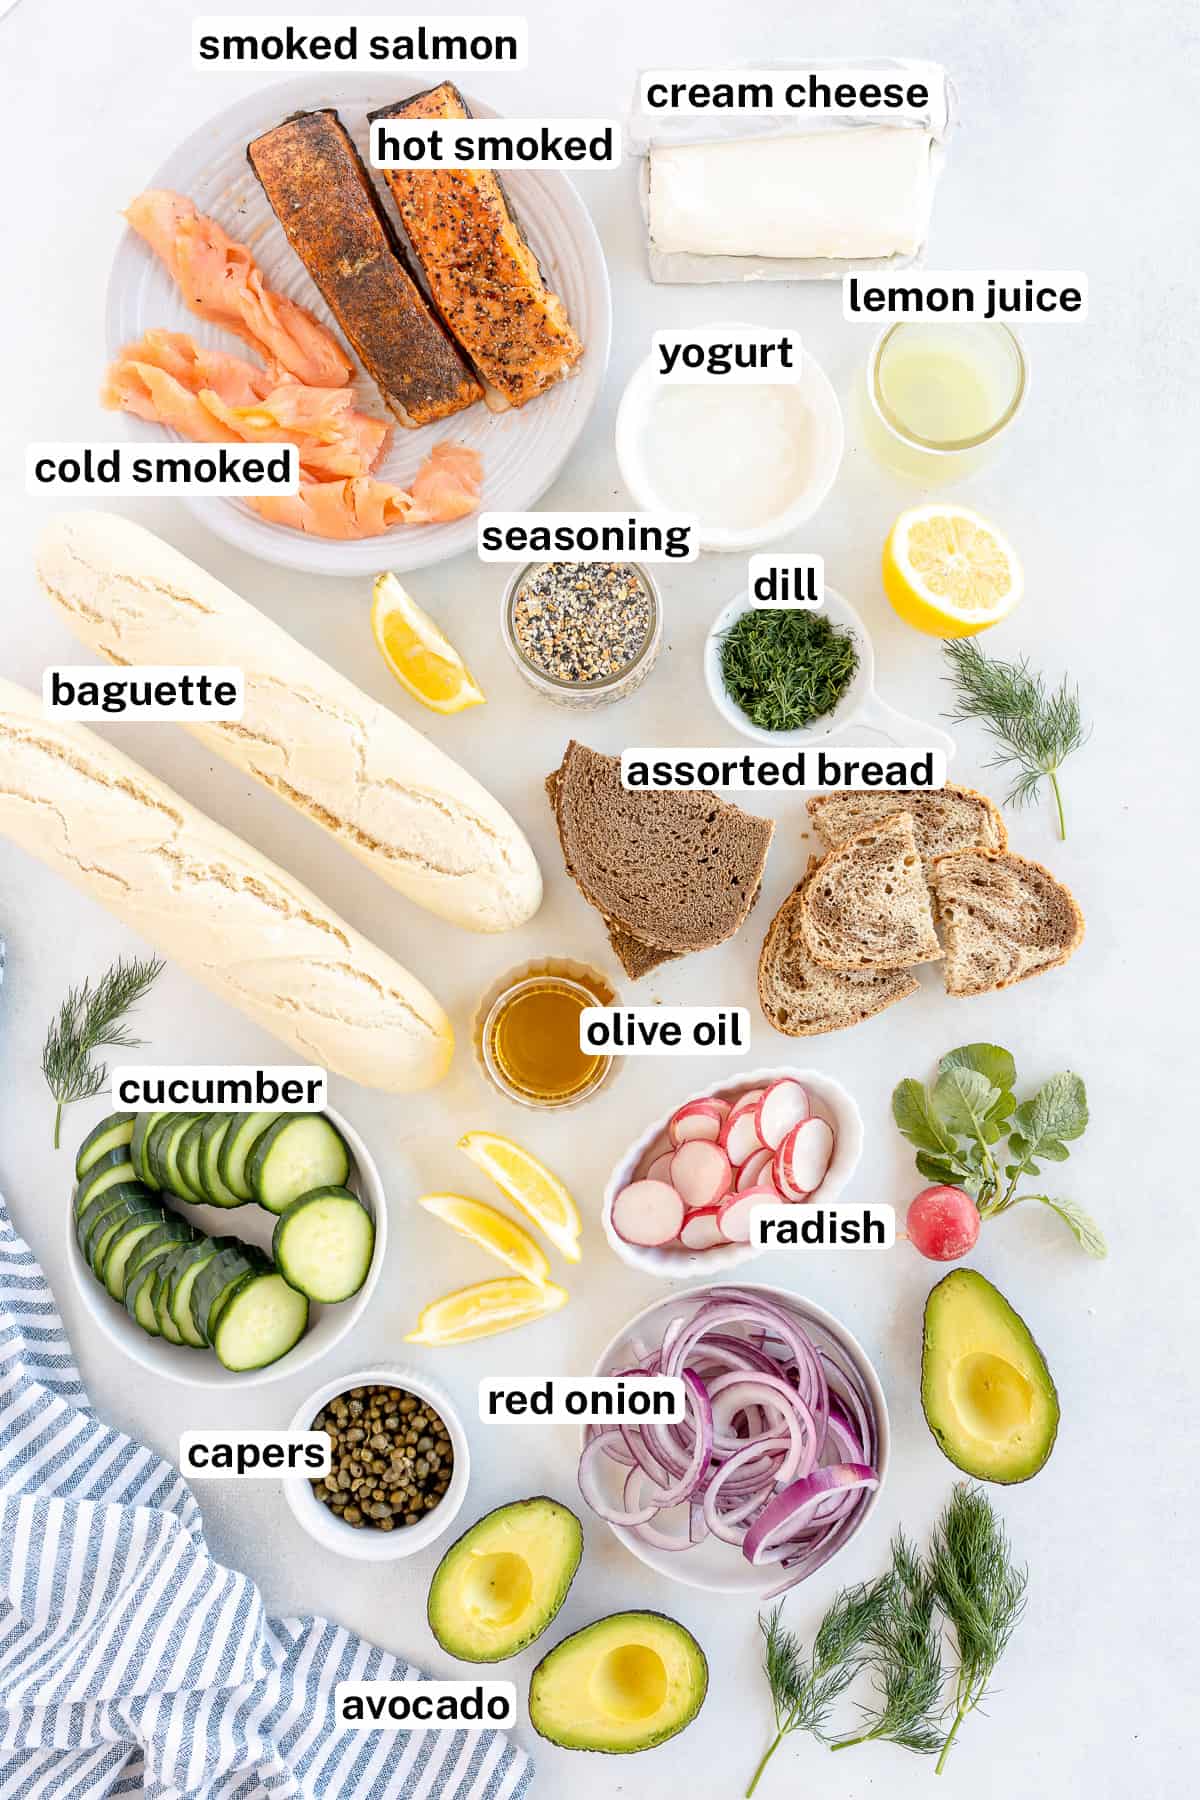 Ingredients for a smoked salmon platter with text.